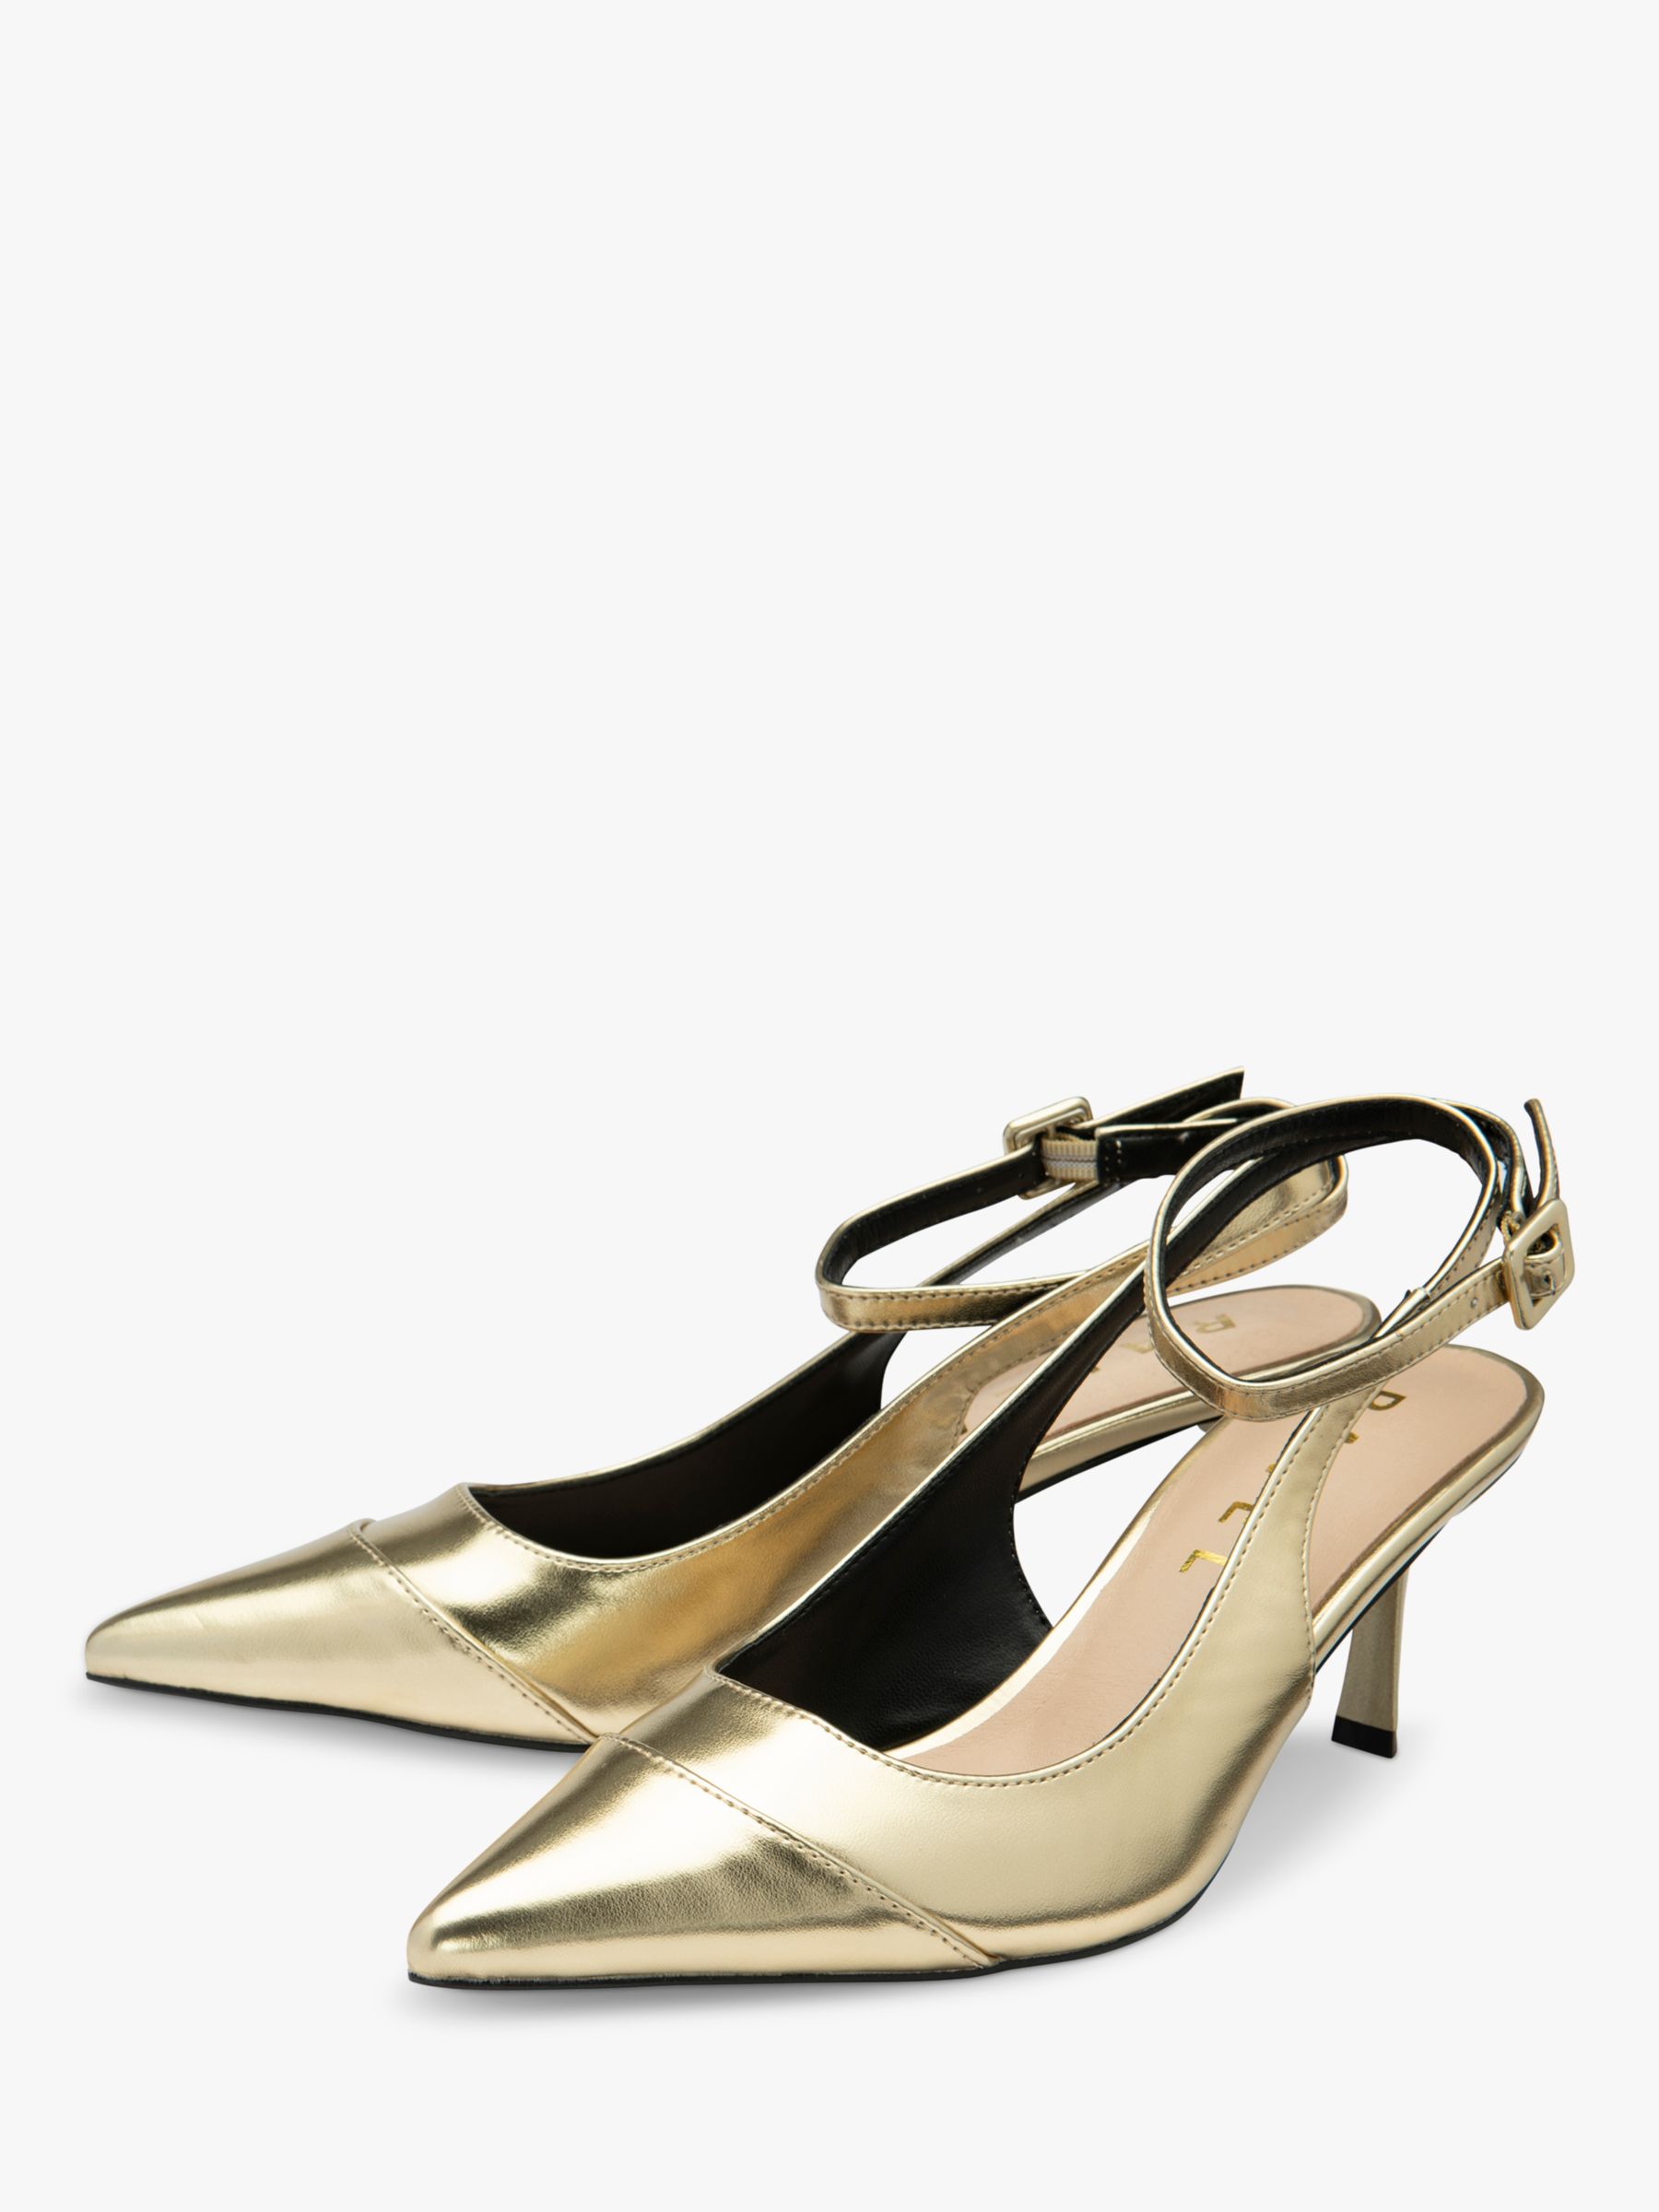 Buy Ravel Catrine Pointed Toe Court Shoes, Black Online at johnlewis.com